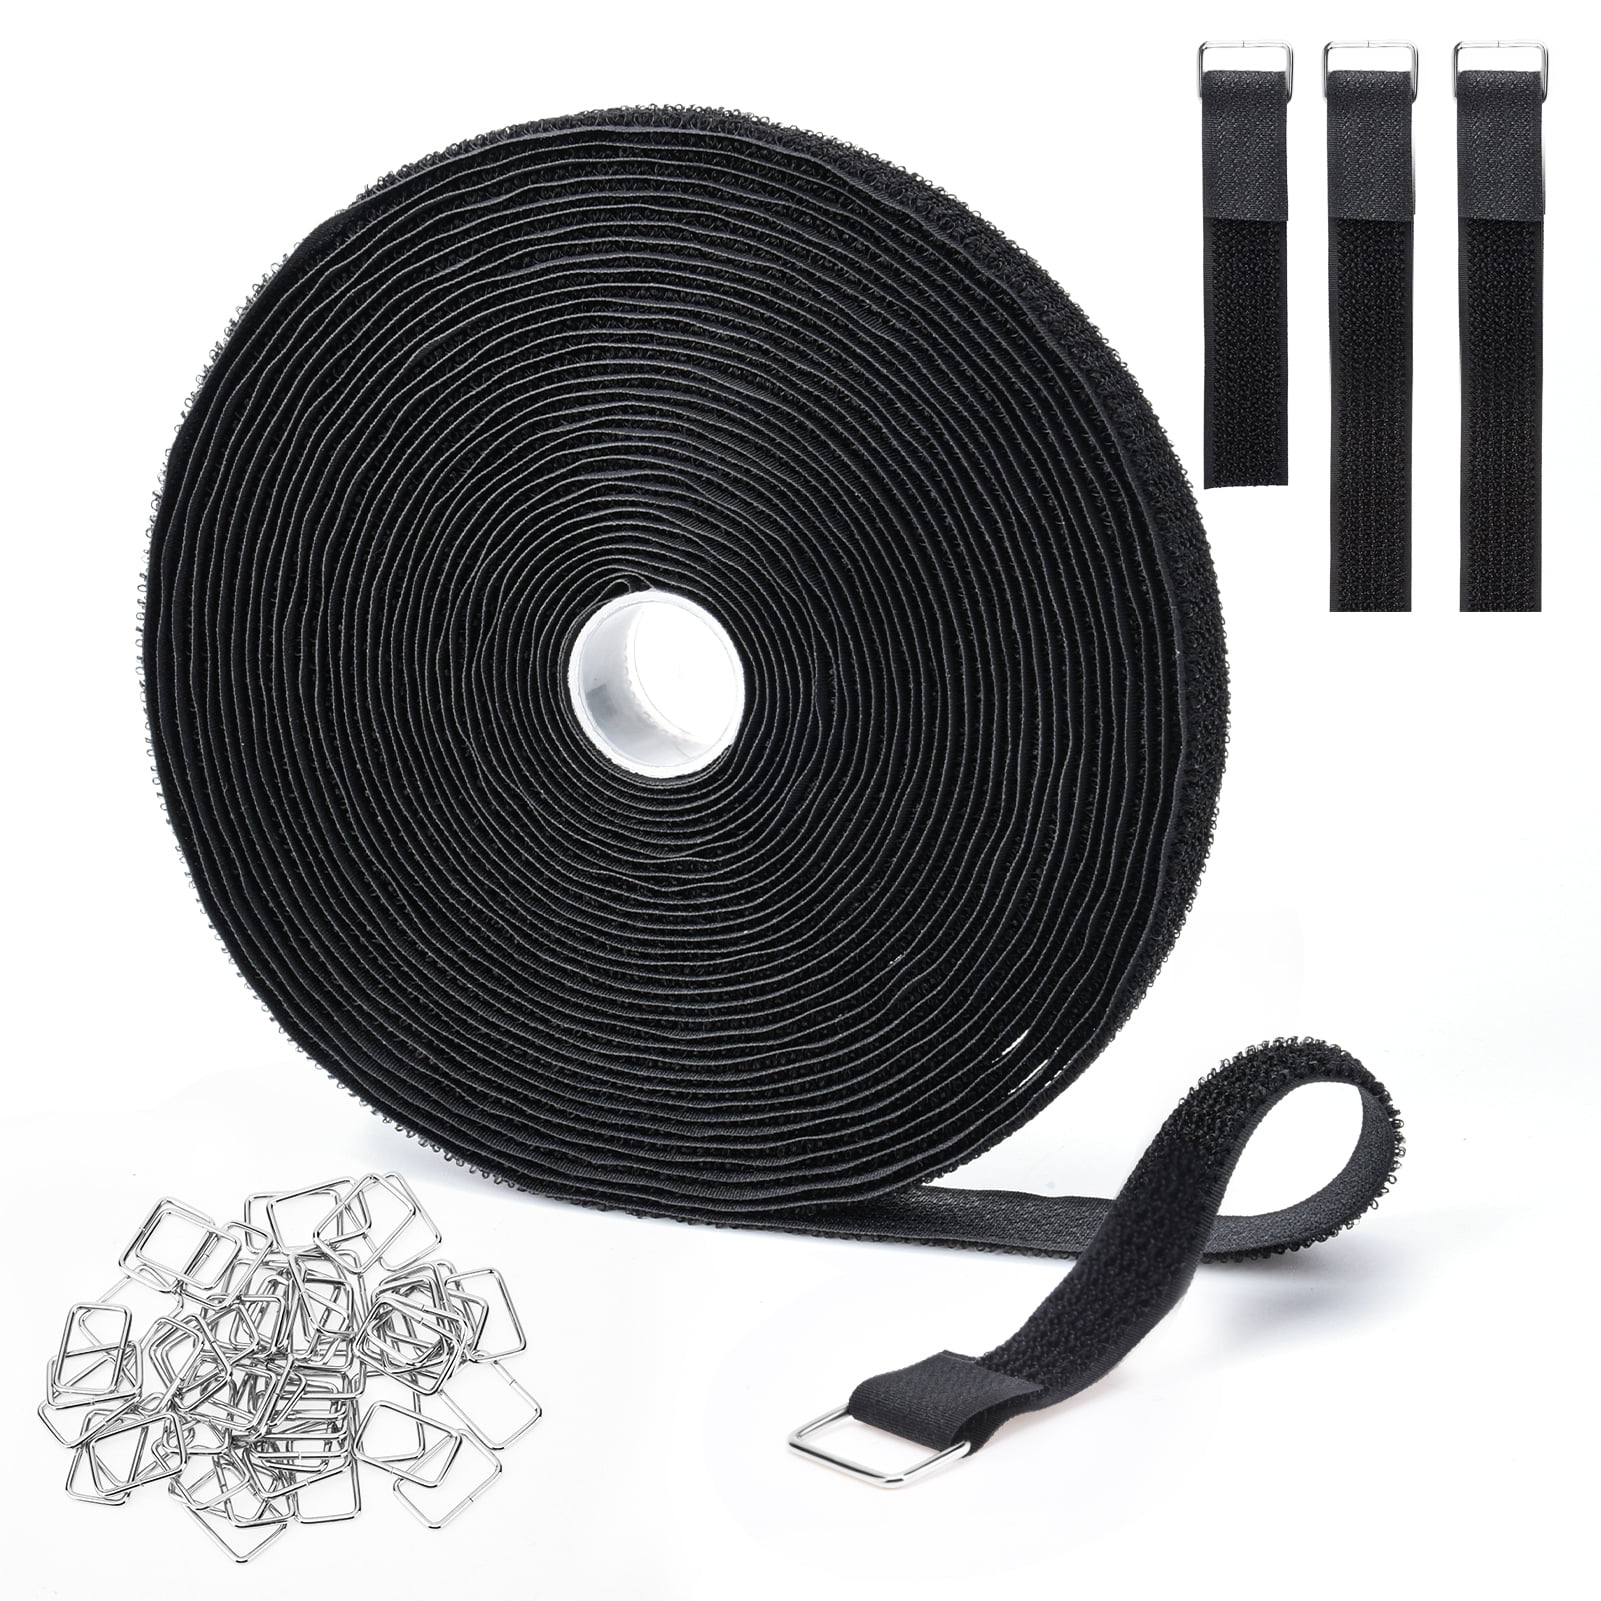  VELCRO Brand ONE WRAP Thin Ties, Strong & Reusable, Perfect  for Fastening Wires & Organizing Cords, Black/Gray, 15in x 1/2-Inch